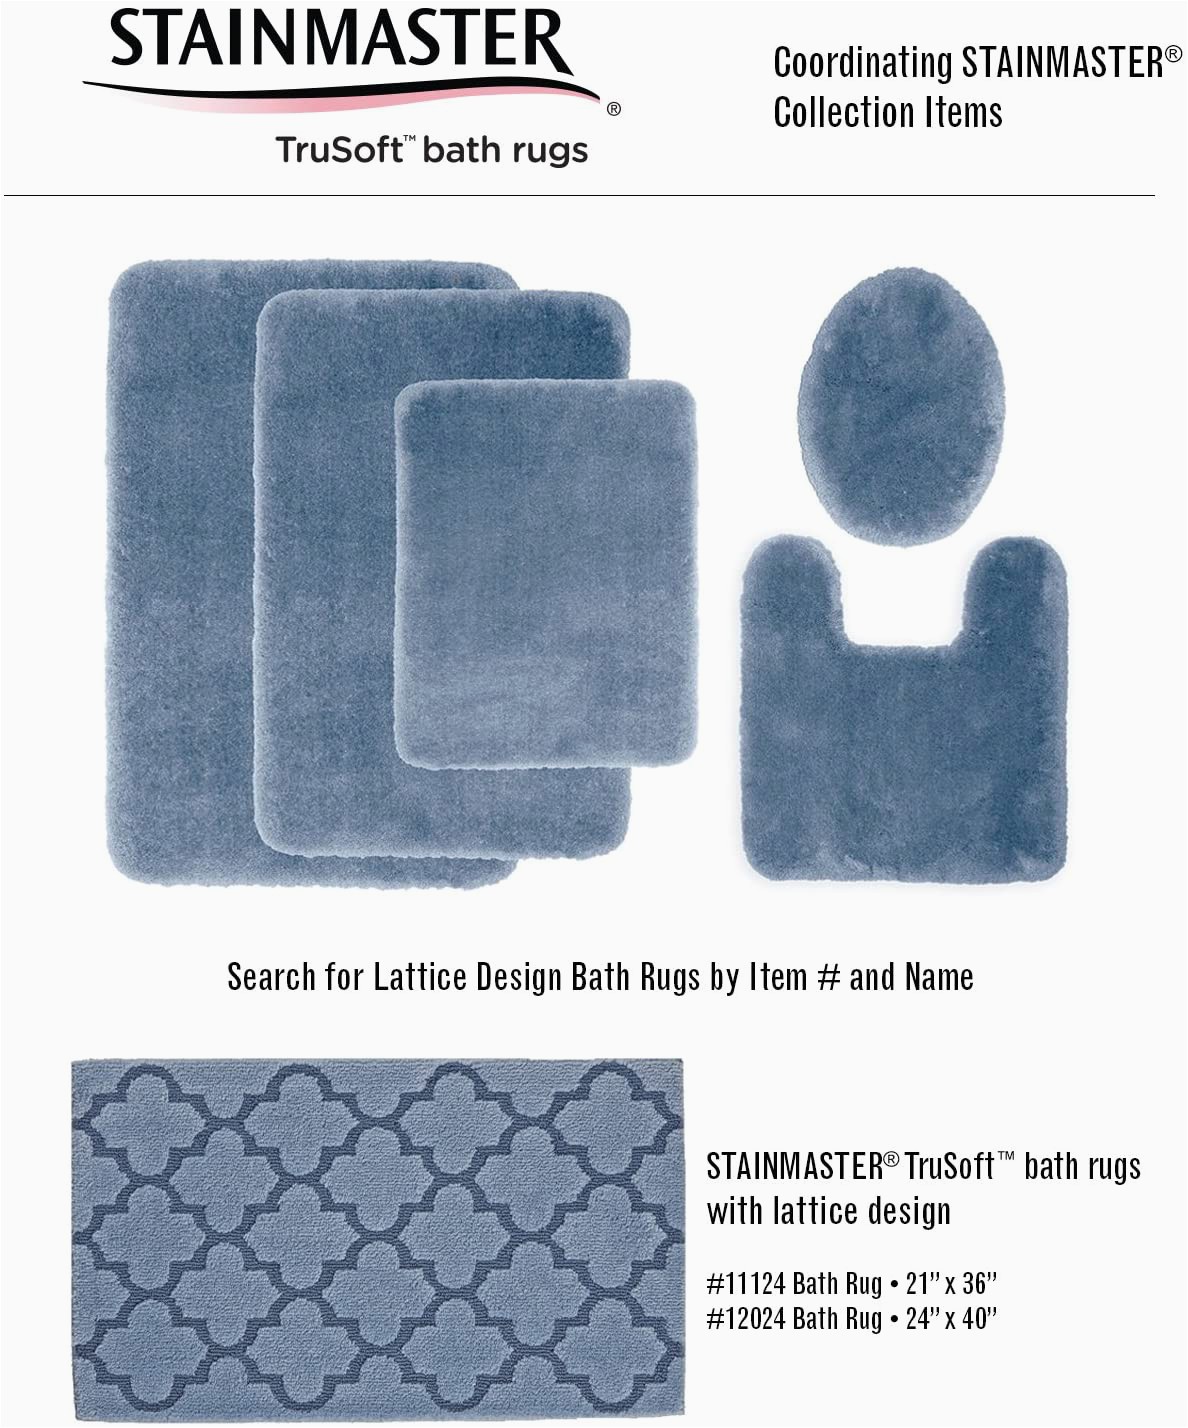 Jcpenney Home Ultima Bath Rug Collection Stainmaster Trusoft Luxurious Contour Bath Rug 20 by 24 Inch Blue Sky